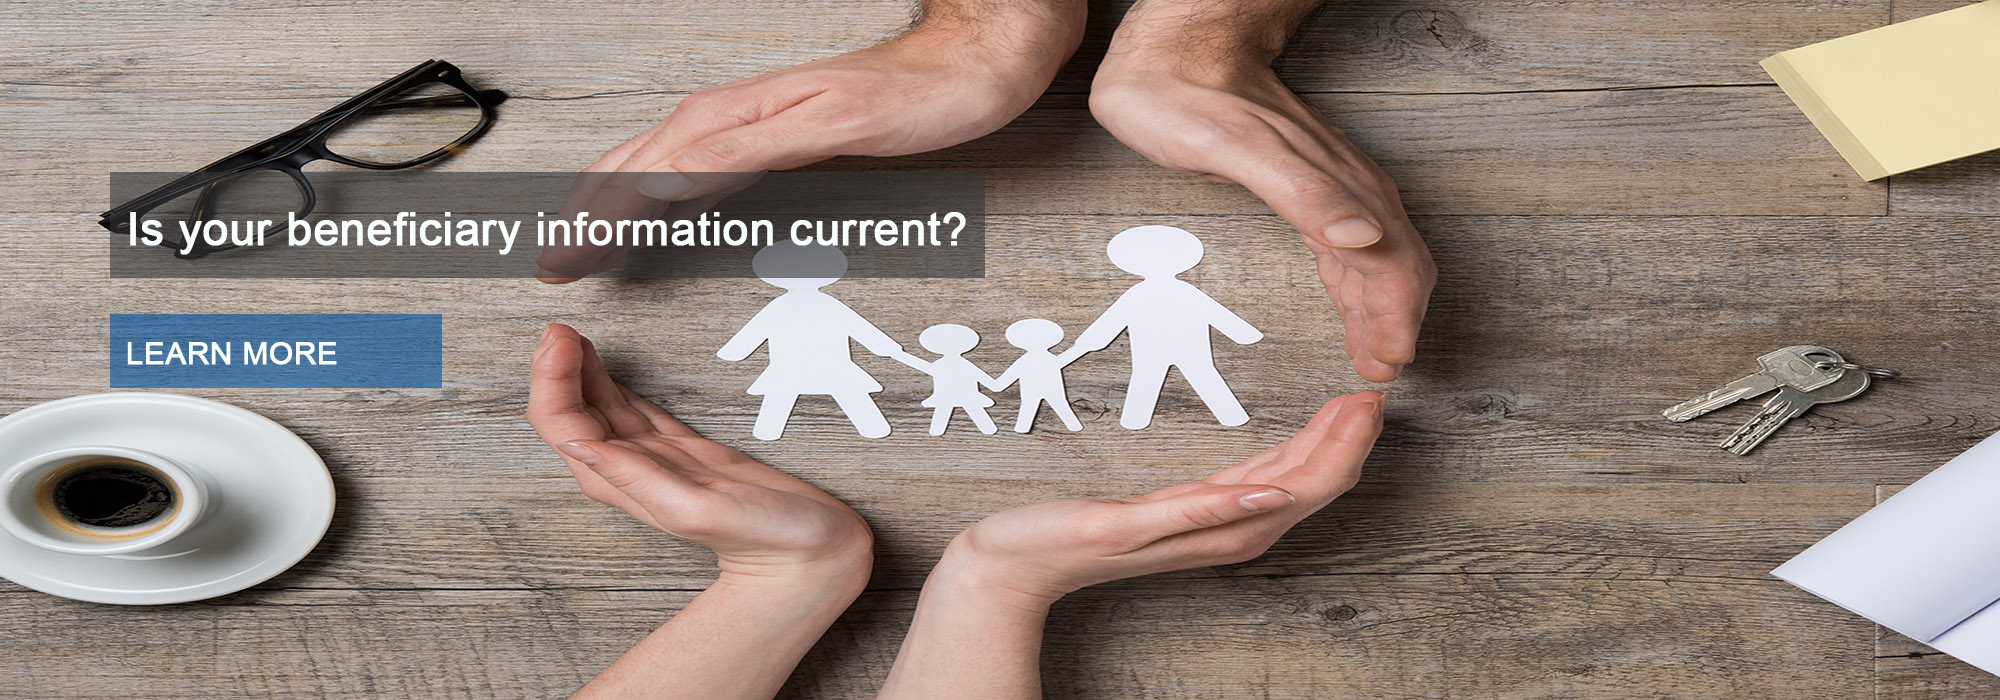 Link to visit the What's New page and download the Beneficiary Designation Form (PDF).